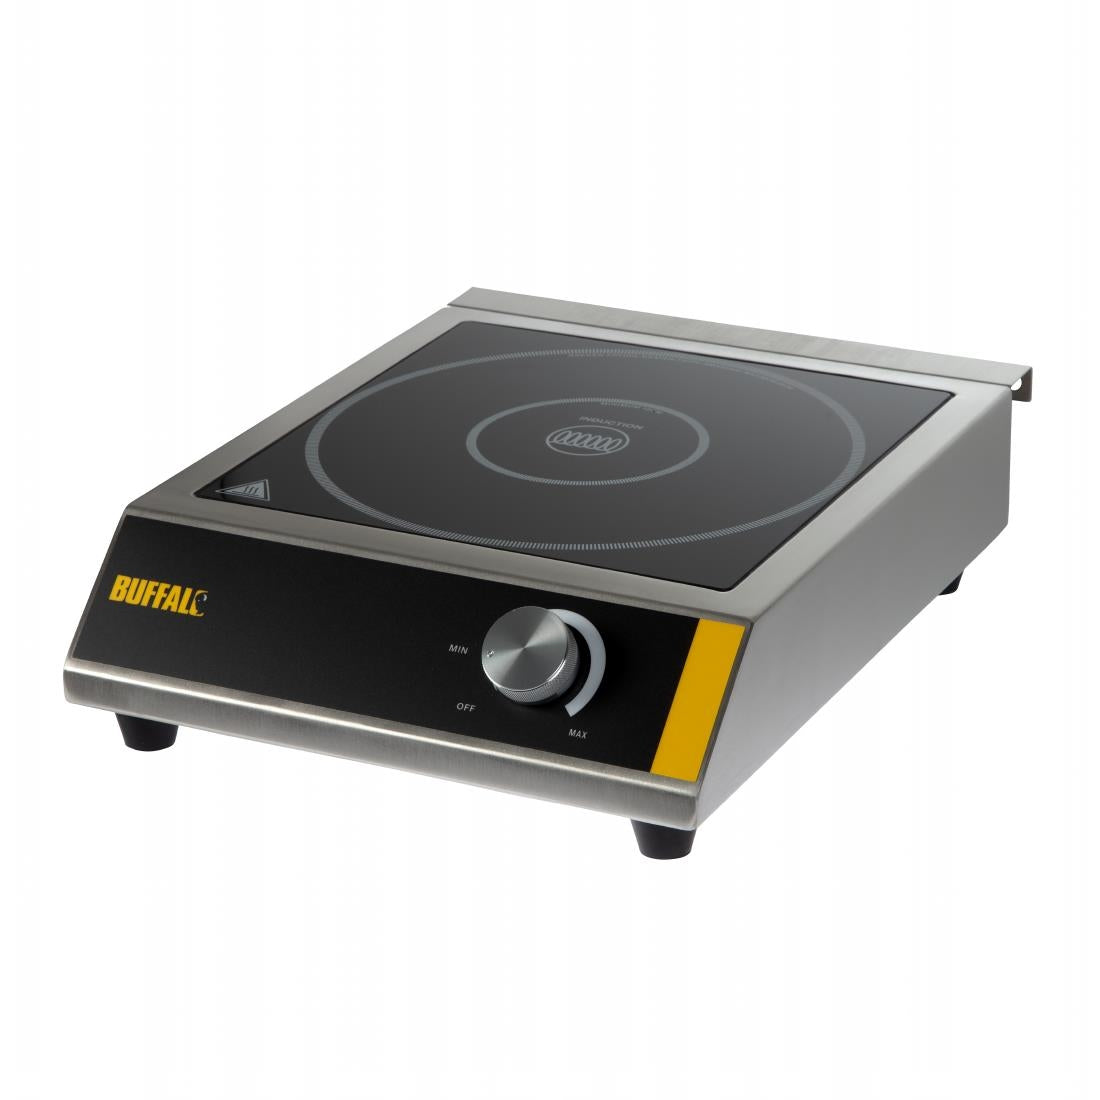 Buffalo Induction Hob 3kW JD Catering Equipment Solutions Ltd